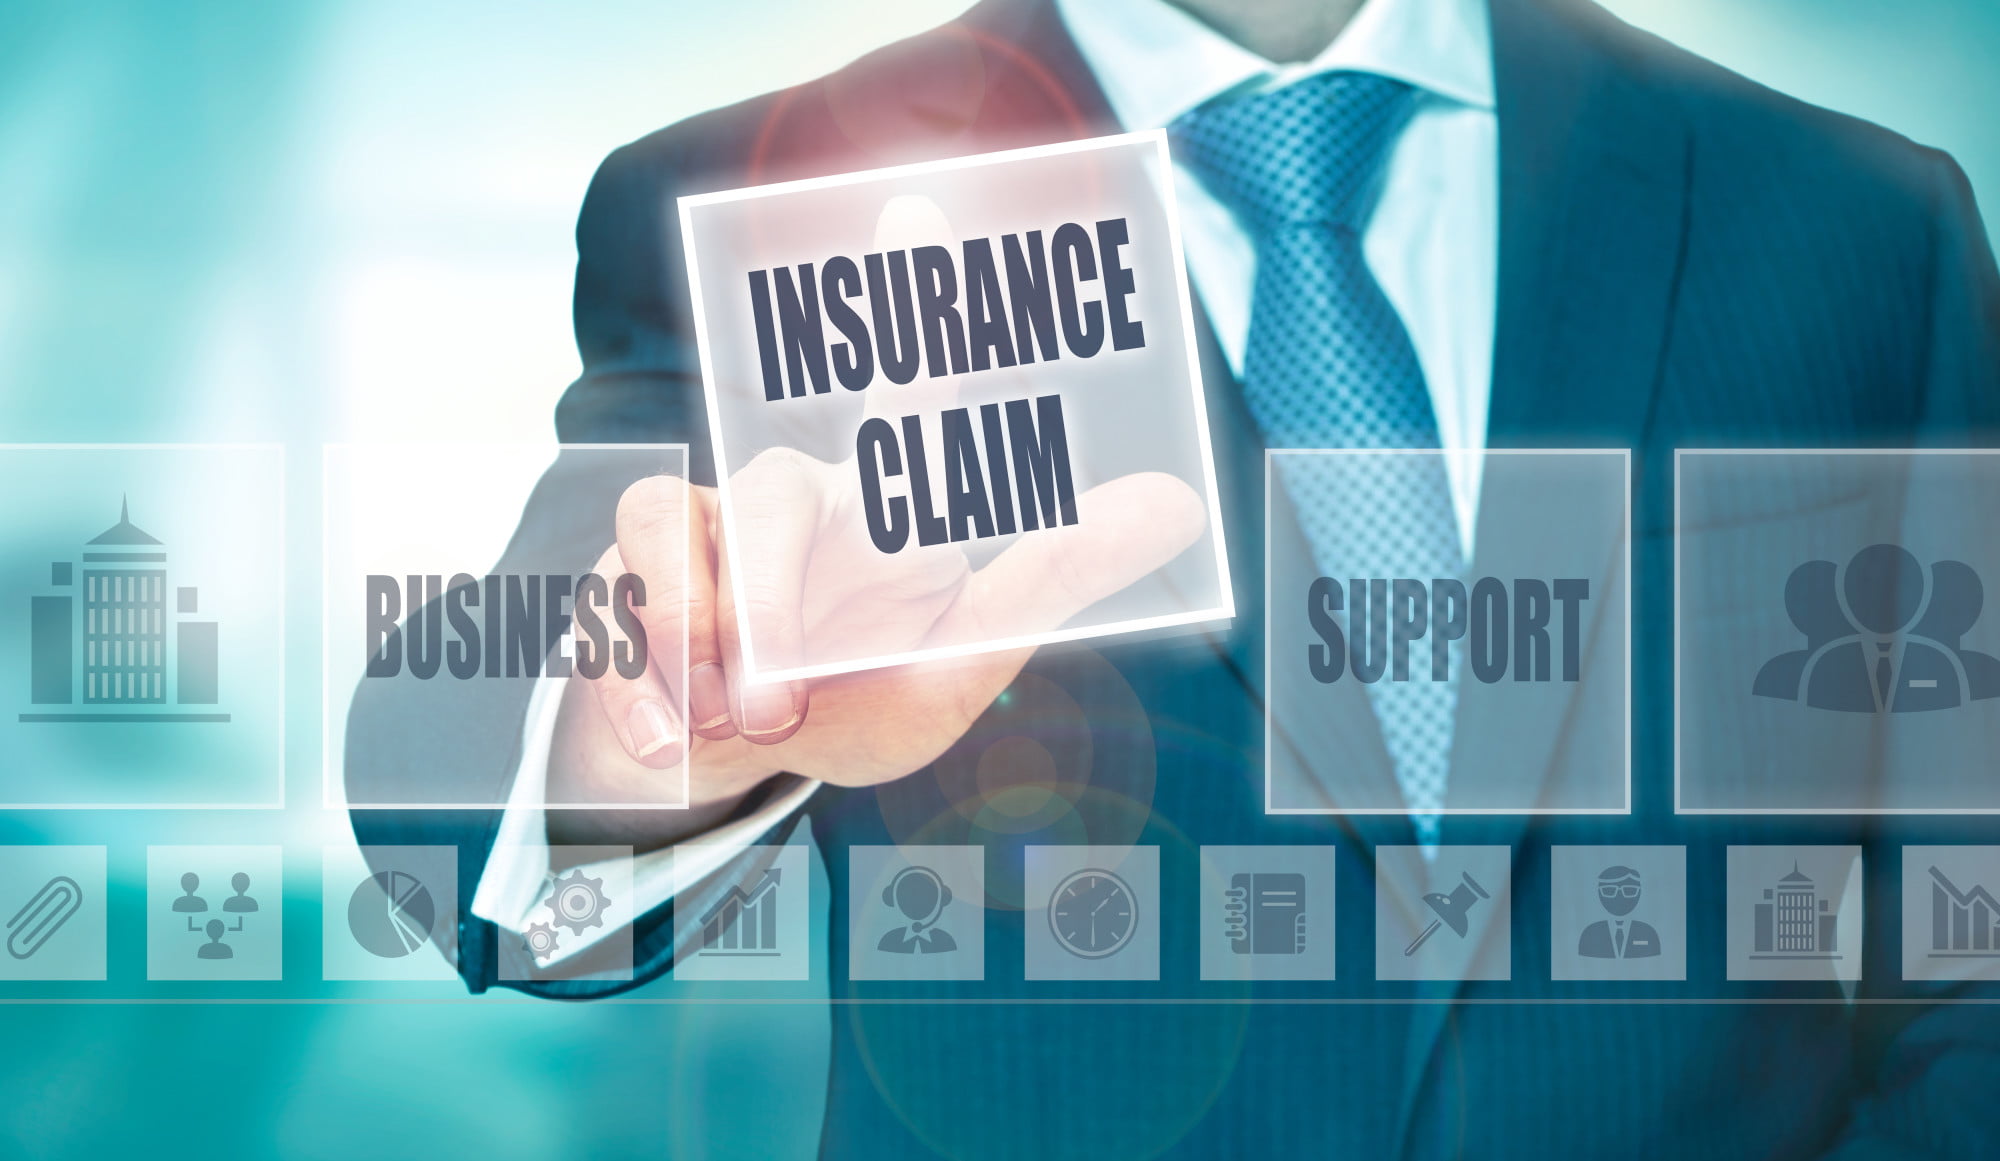 What do you know about filing property insurance claims? Feel free to read about it here in this helpful overview on the subject.